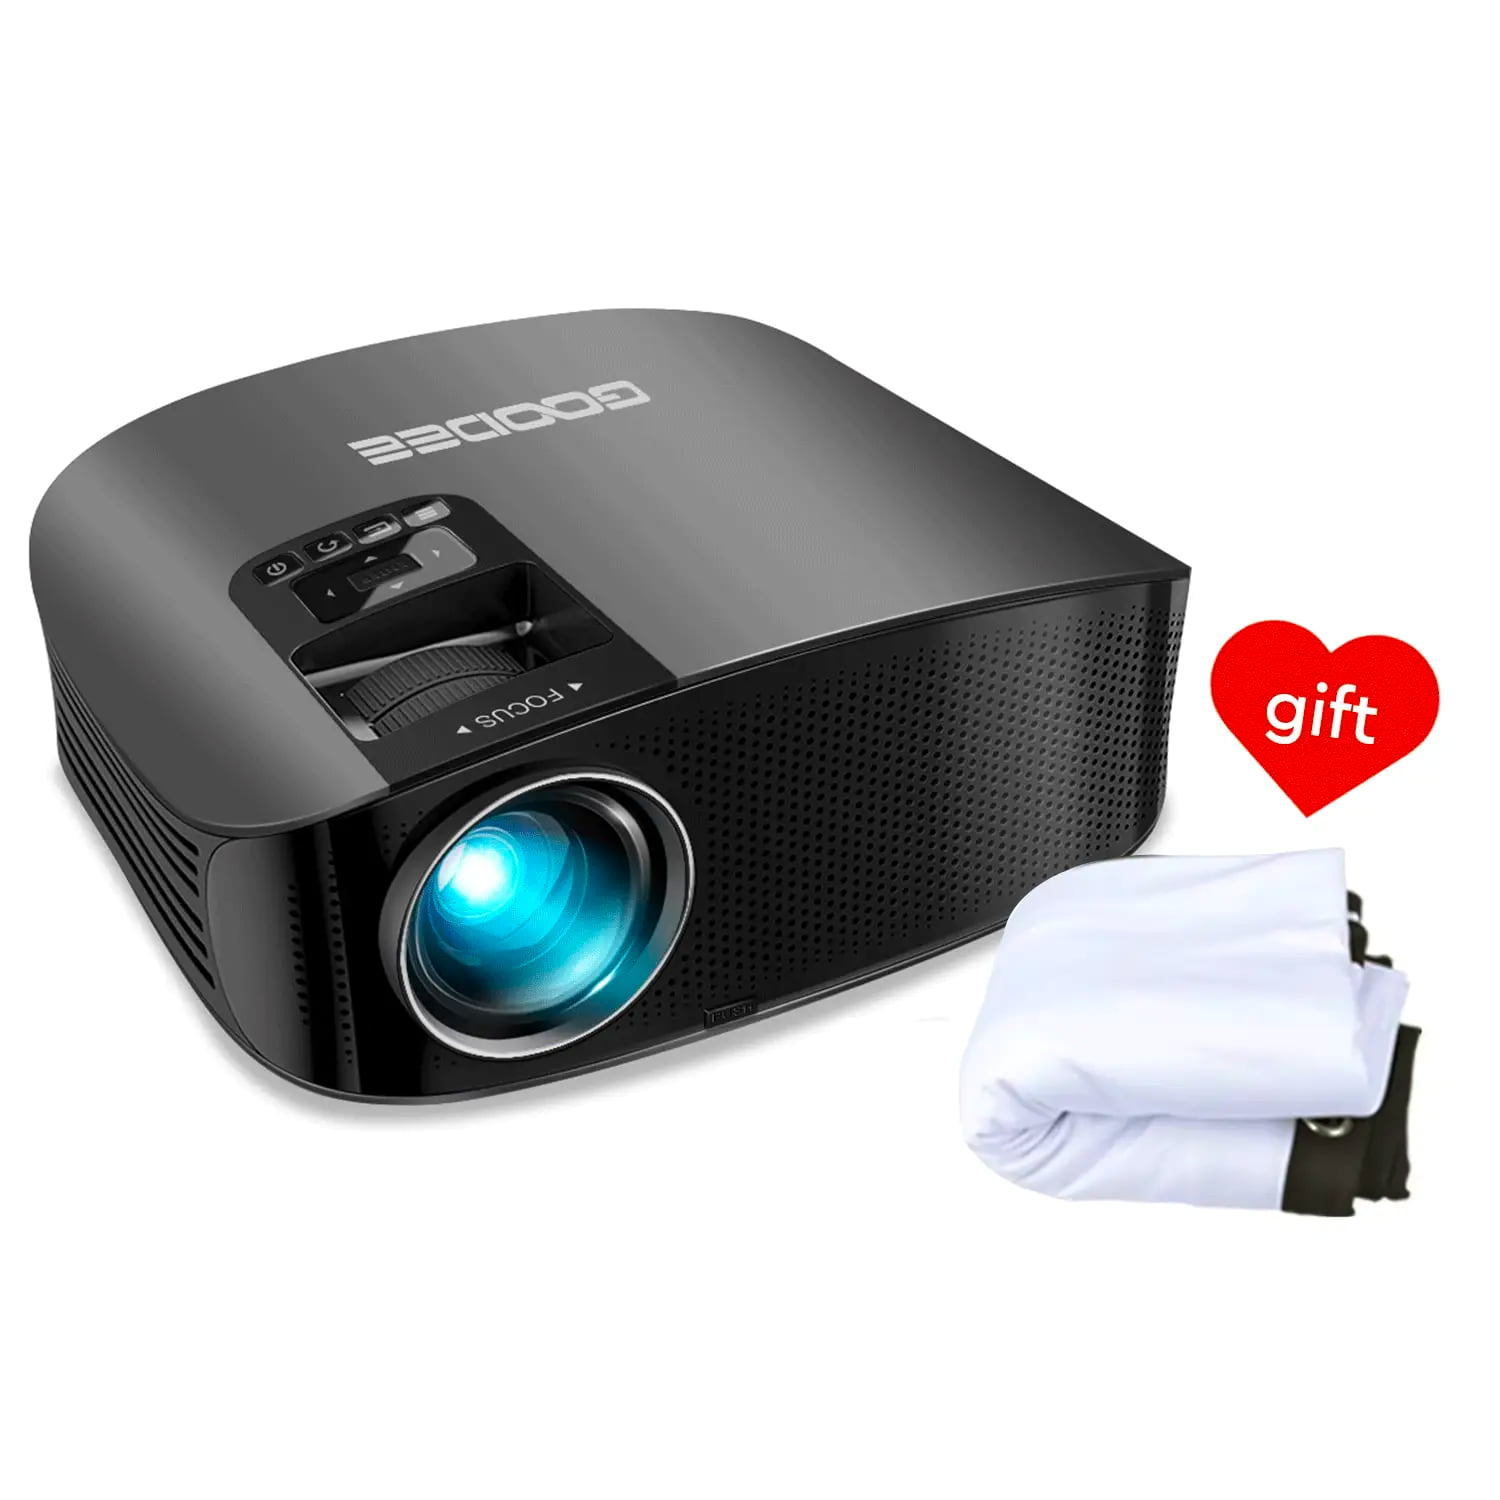 Goodee Projector Review